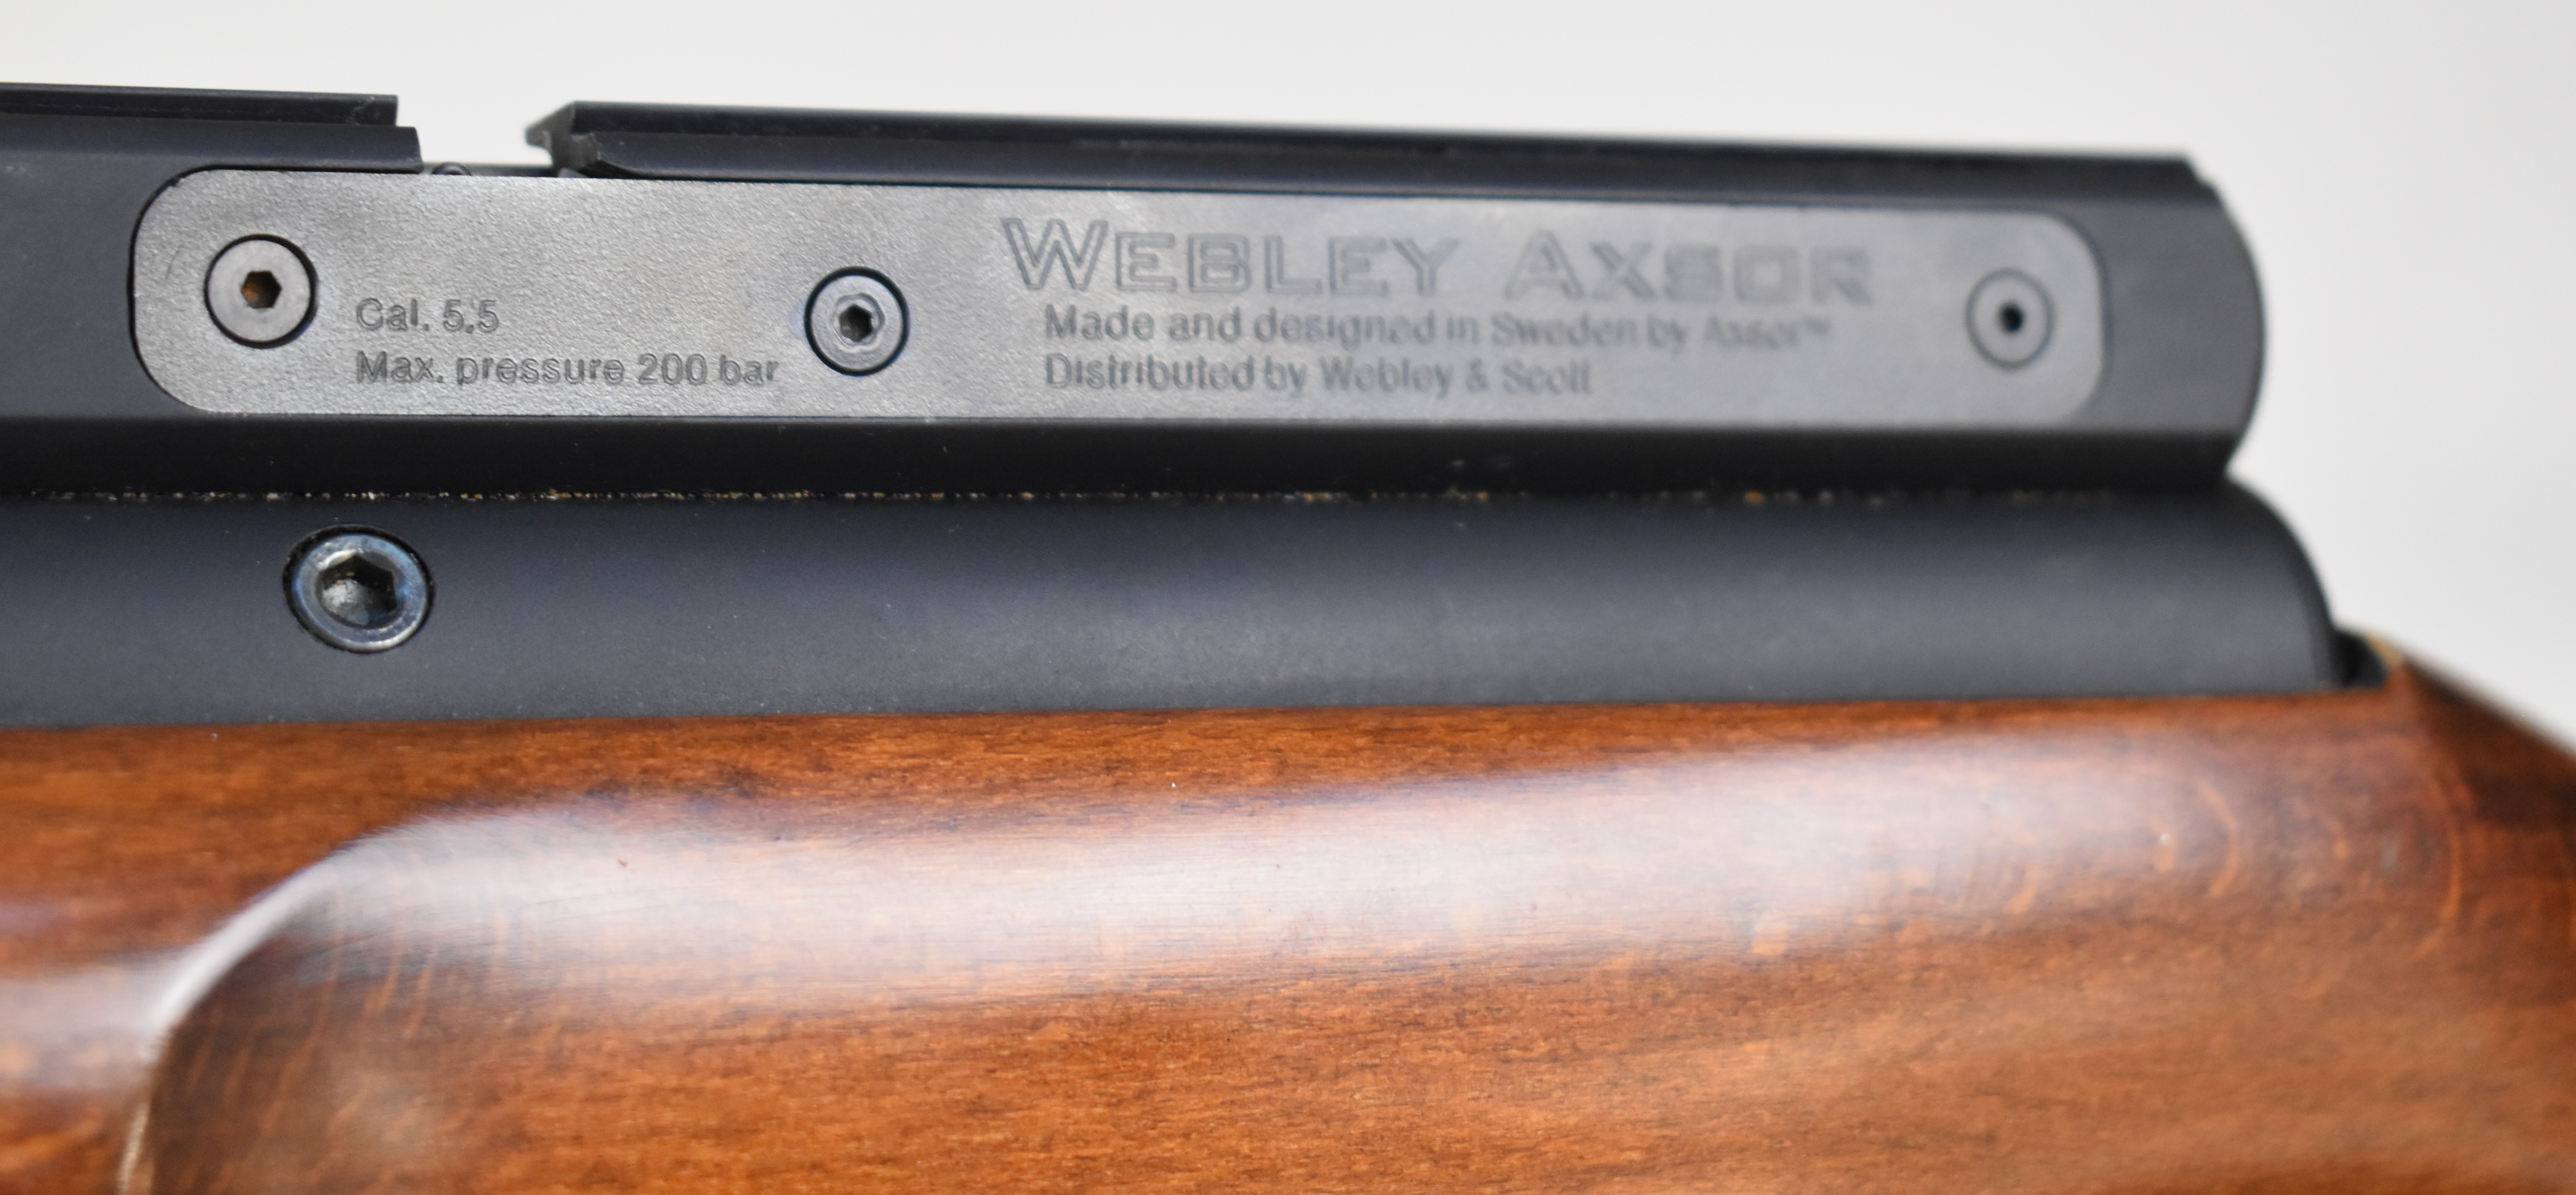 Webley Axsor .22 PCP air rifle with chequered semi-pistol grip and forend, raised cheek piece, - Image 10 of 10